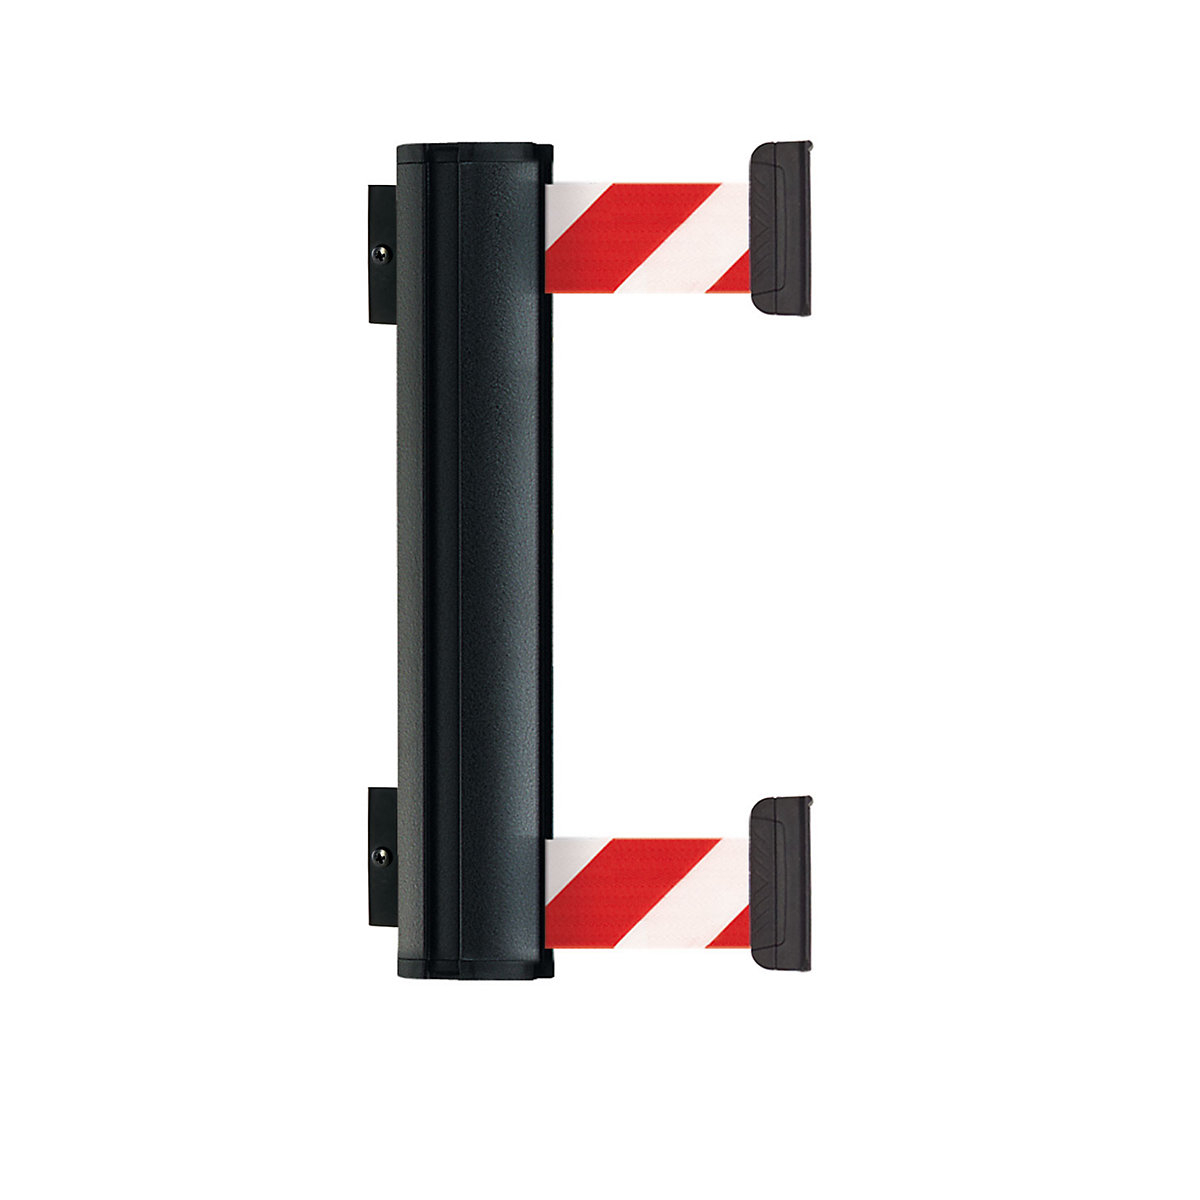 DOUBLE tape belt cartridge made of aluminium, belt extends to max. 2300 mm, red / white belt